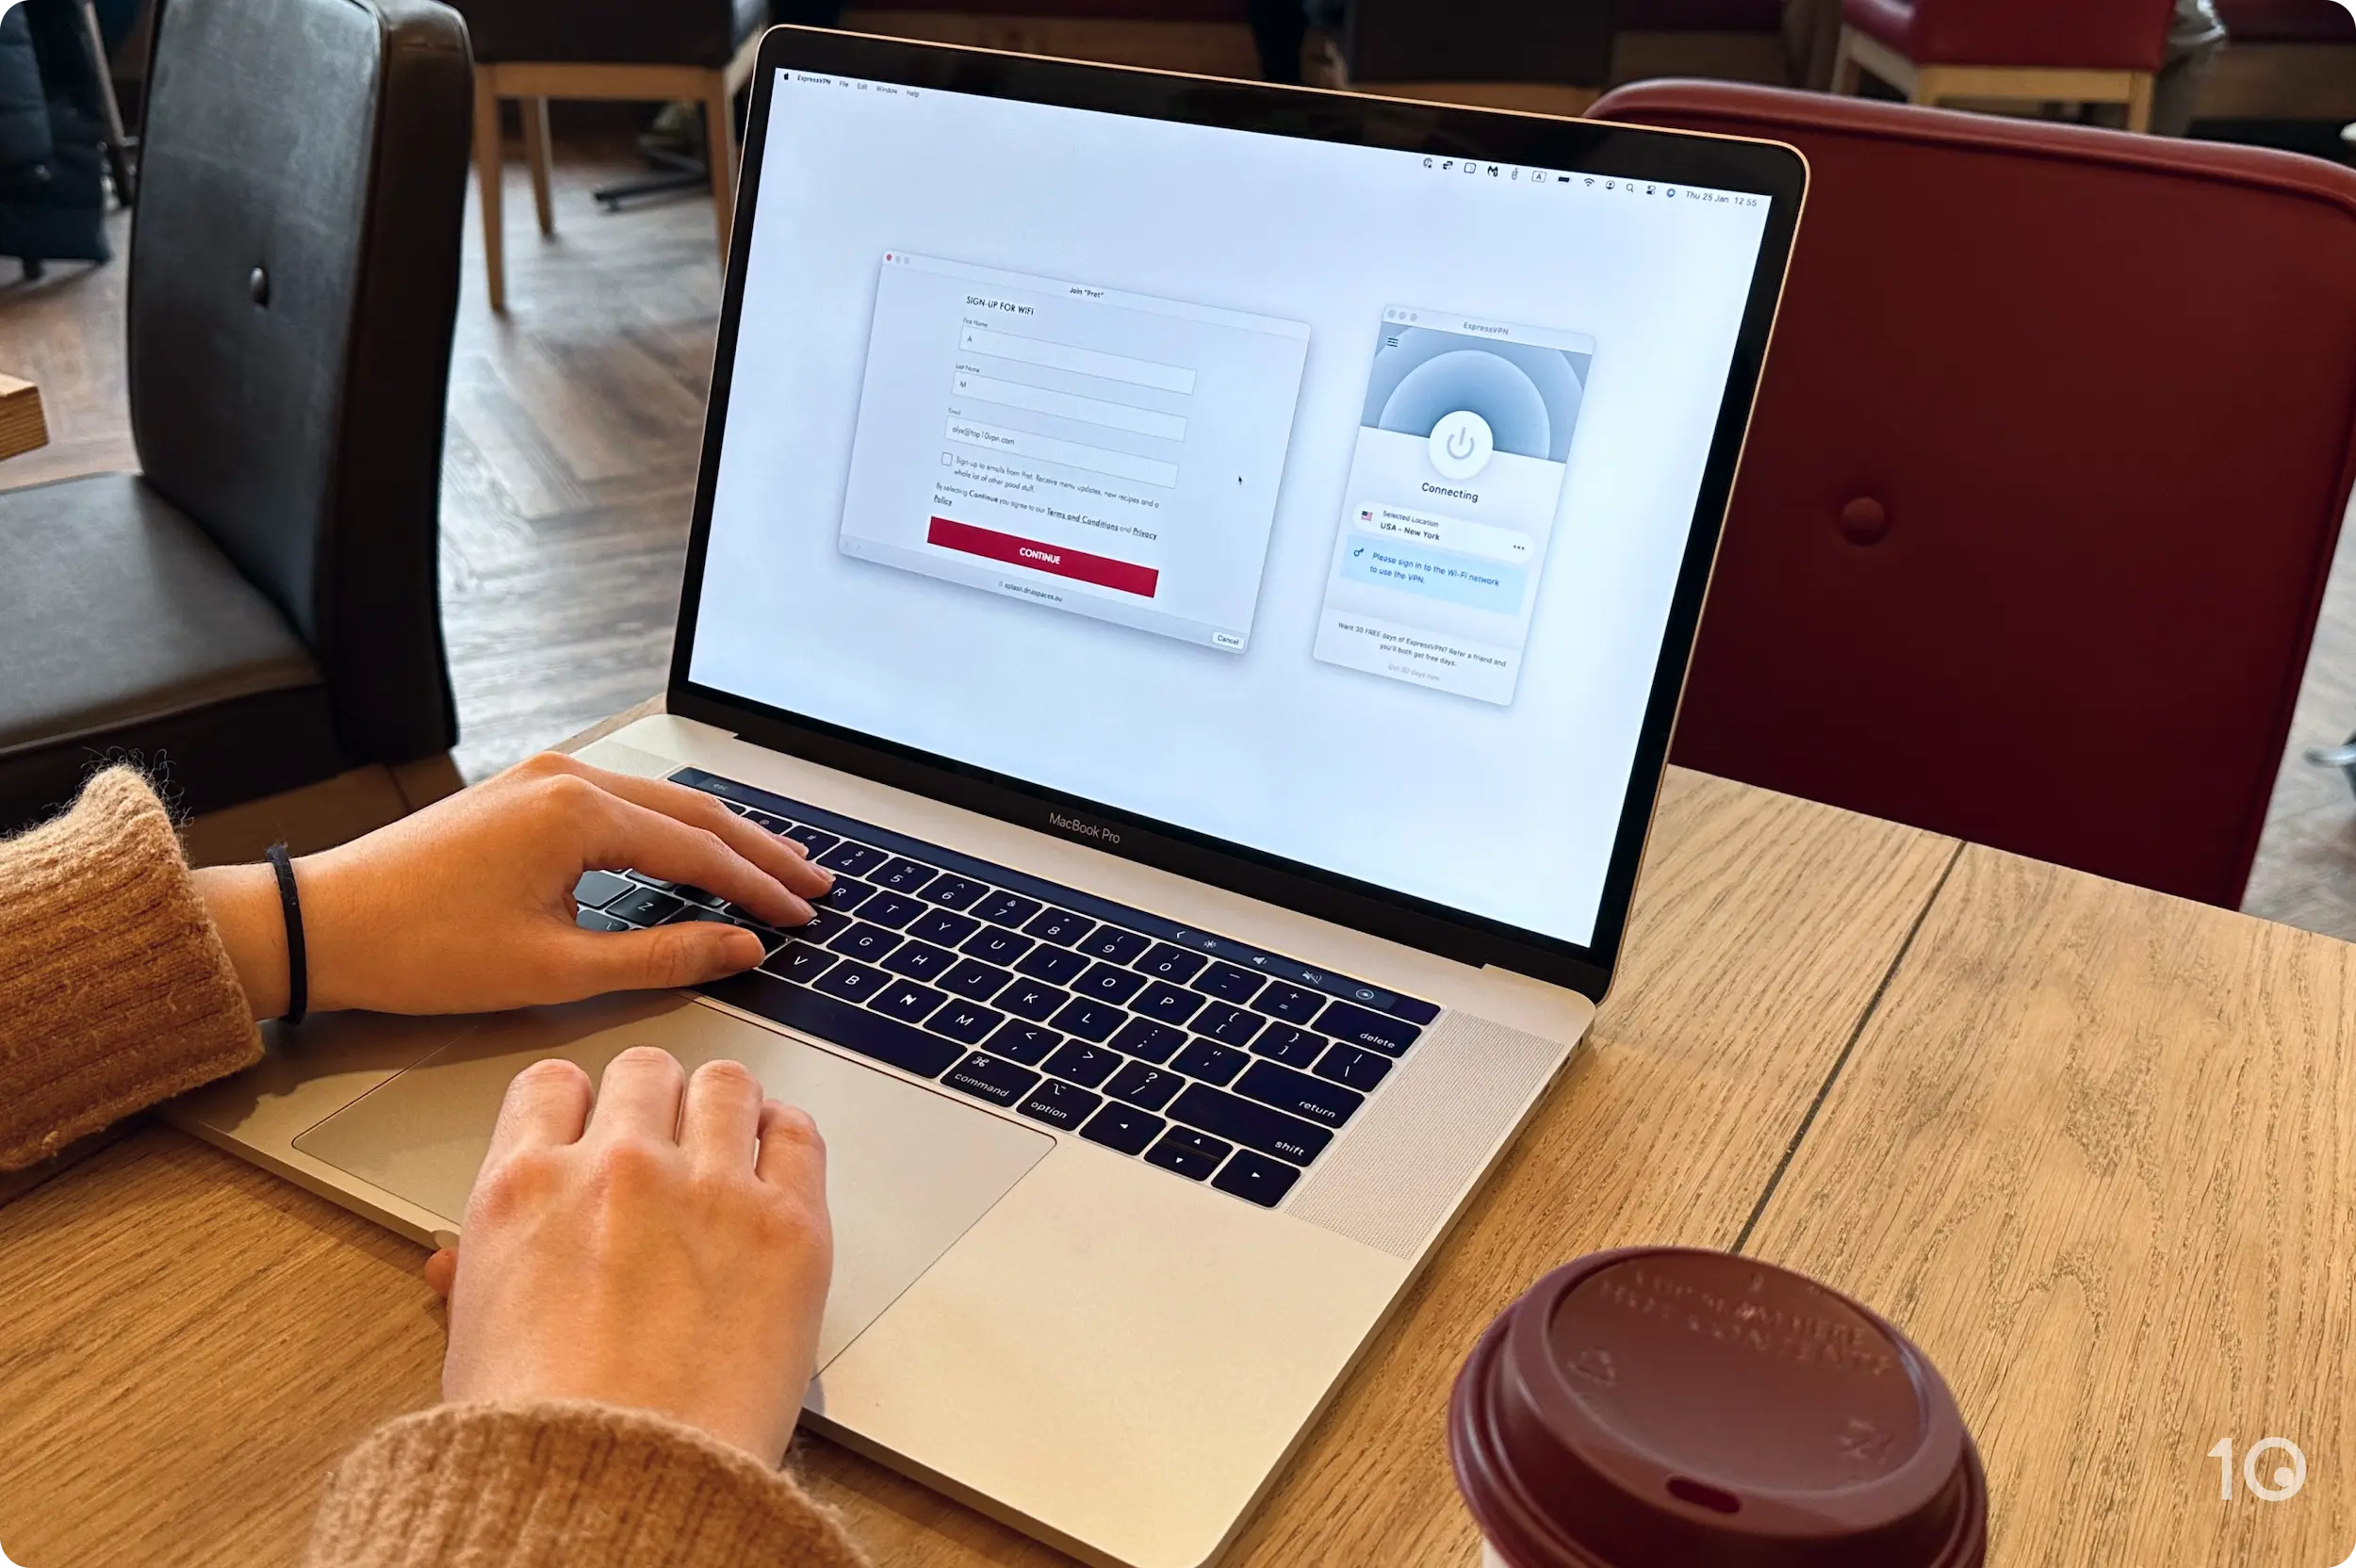 In a coffee shop, using a MacBook to connect to public WiFi with ExpressVPN. 